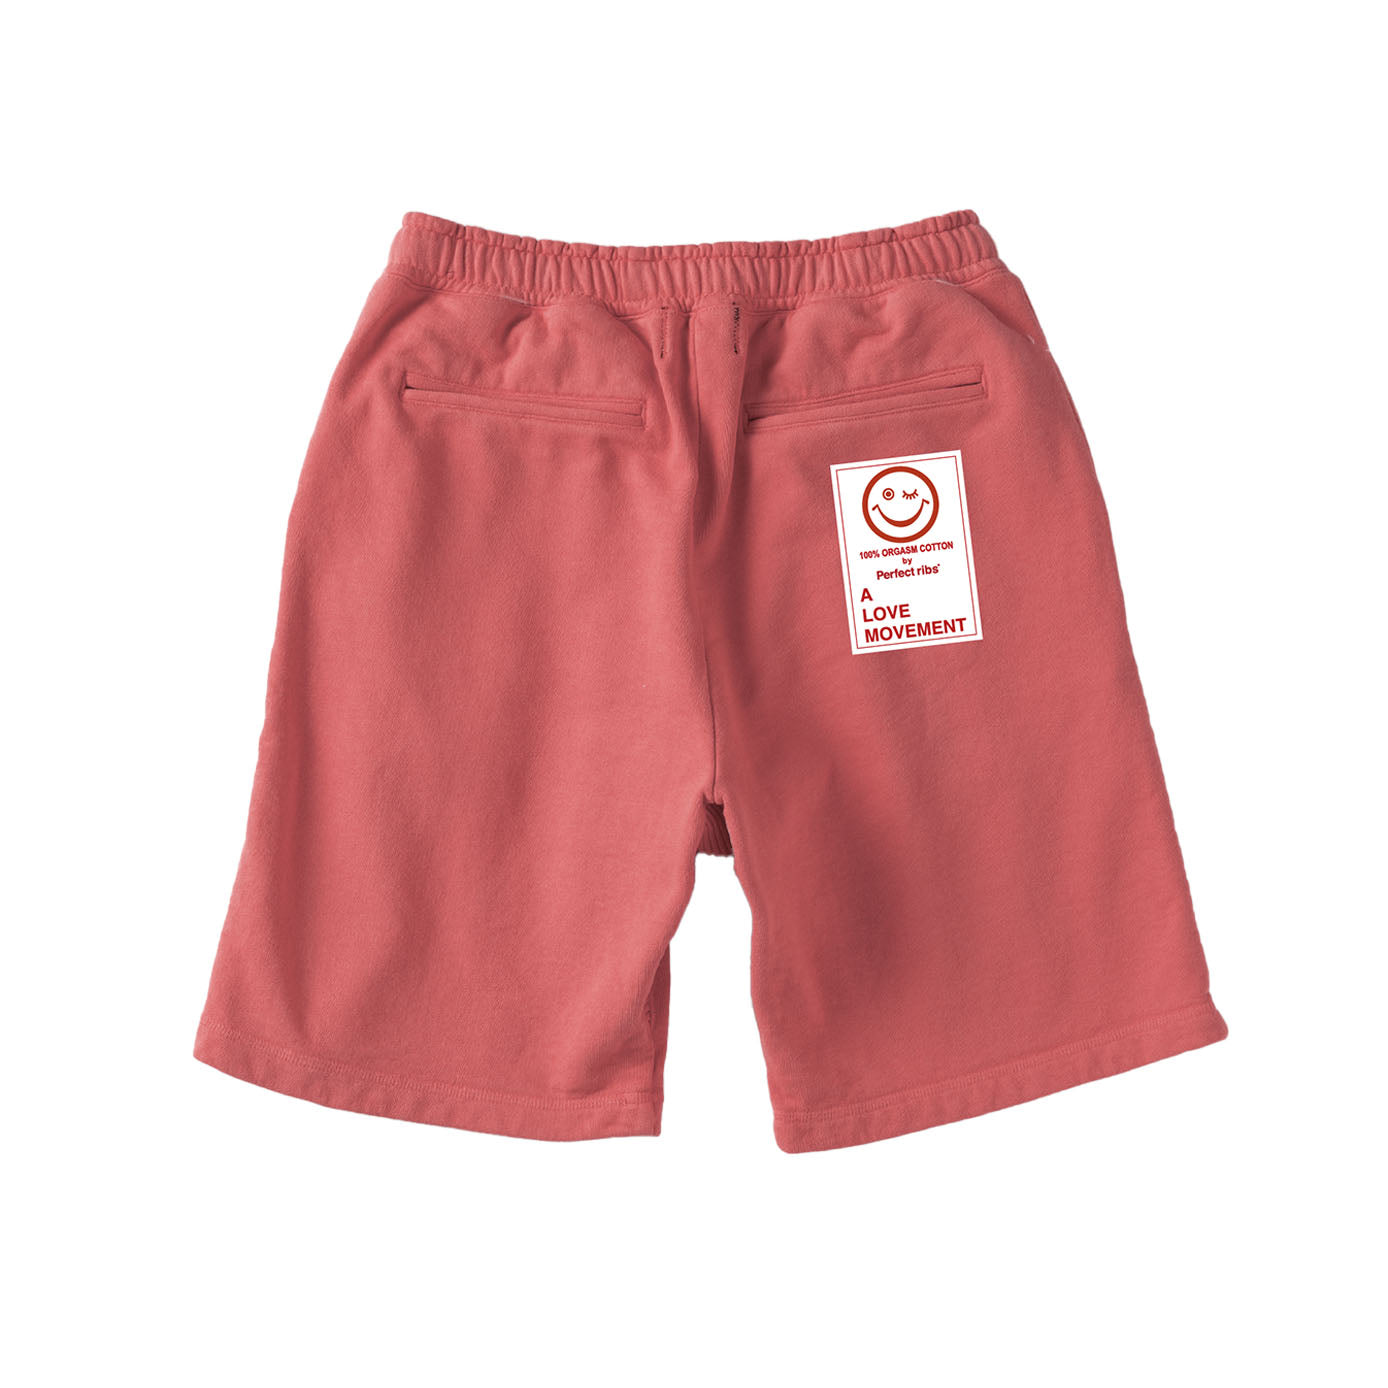 【Perfect ribs®︎×A LOVE MOVEMENT】"adios & RELAX" Sweat Short Pants / Vintage Red(スウェットショートパンツ/ヴィンテージレッド)